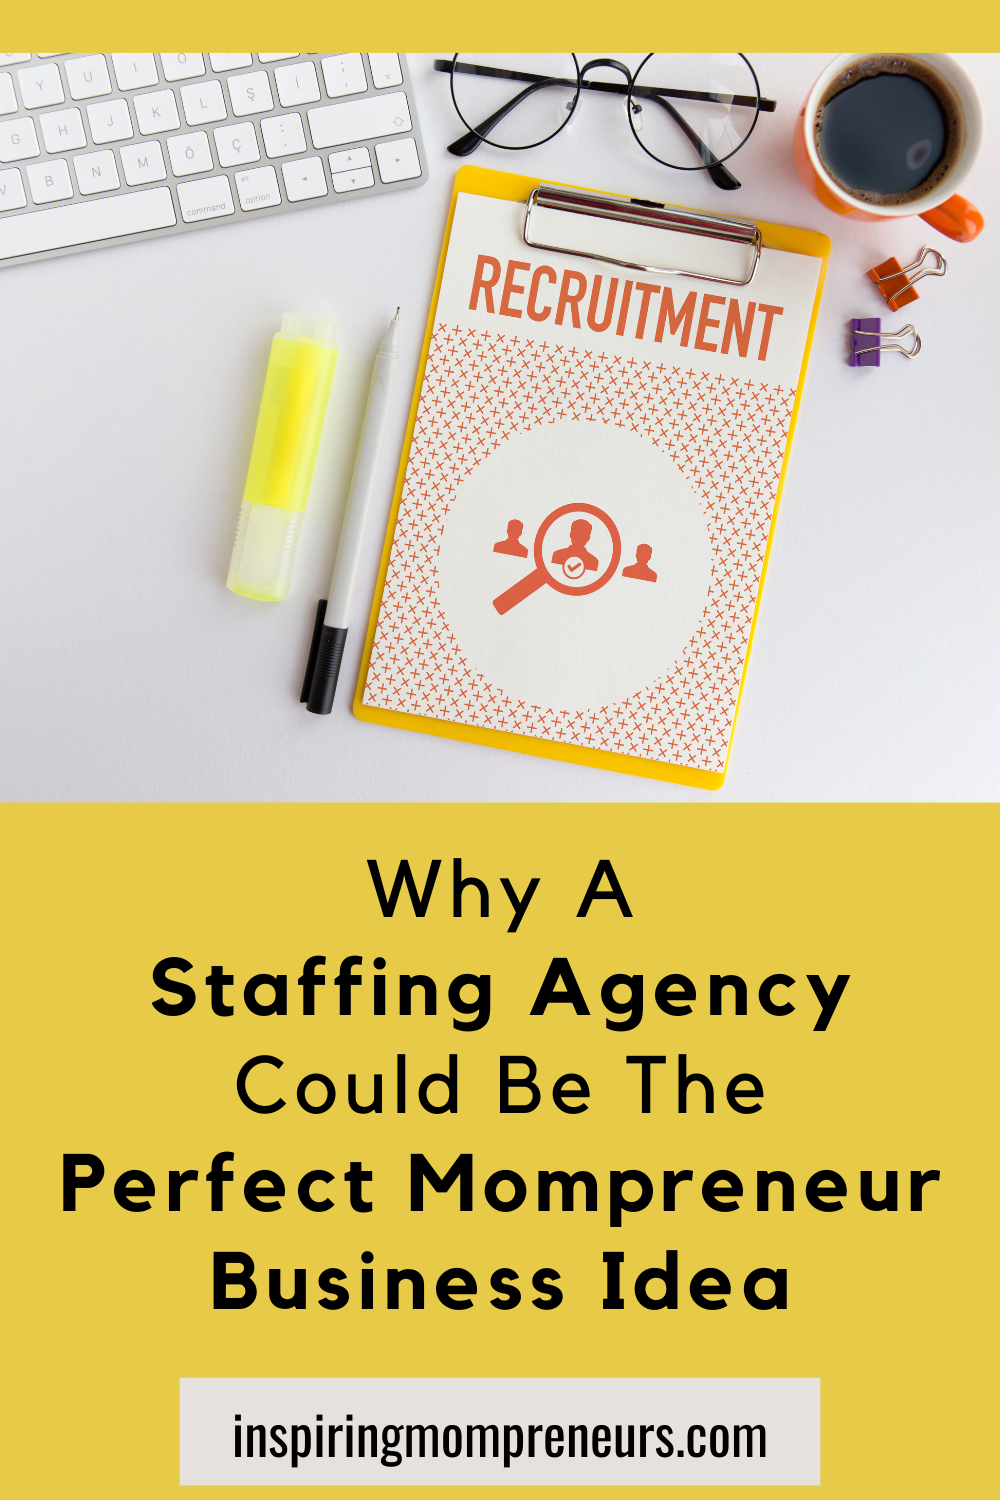 A staffing agency is a company that helps connect businesses with staff. Here's why a staffing agency could be the perfect business idea for Mompreneurs.